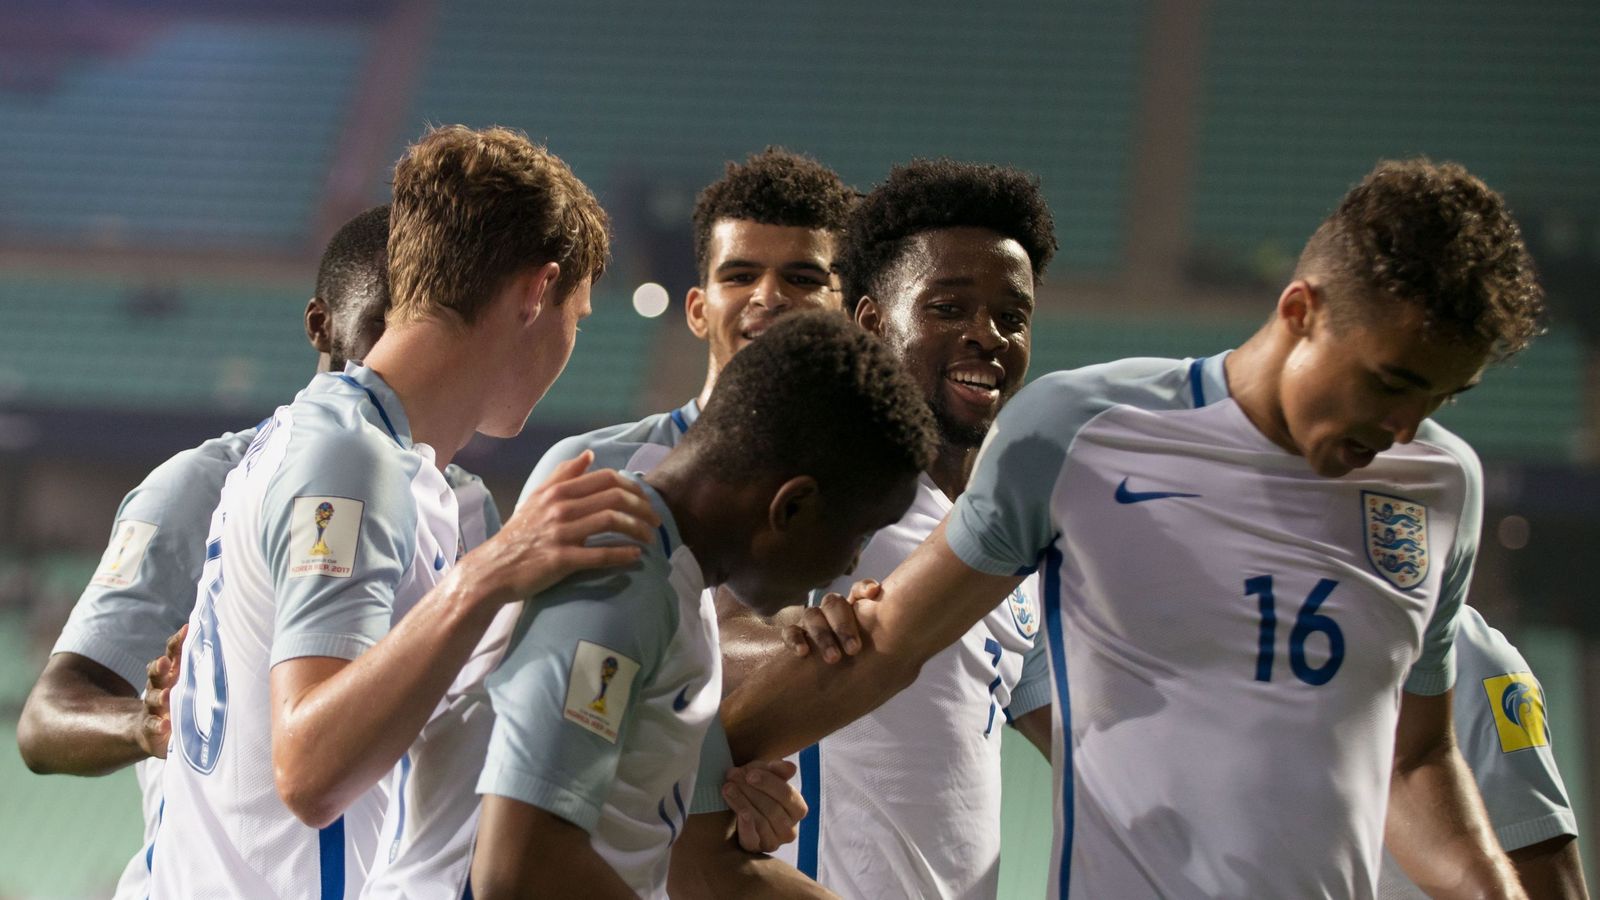 England U20's have reached a World Cup semifinal but who are the